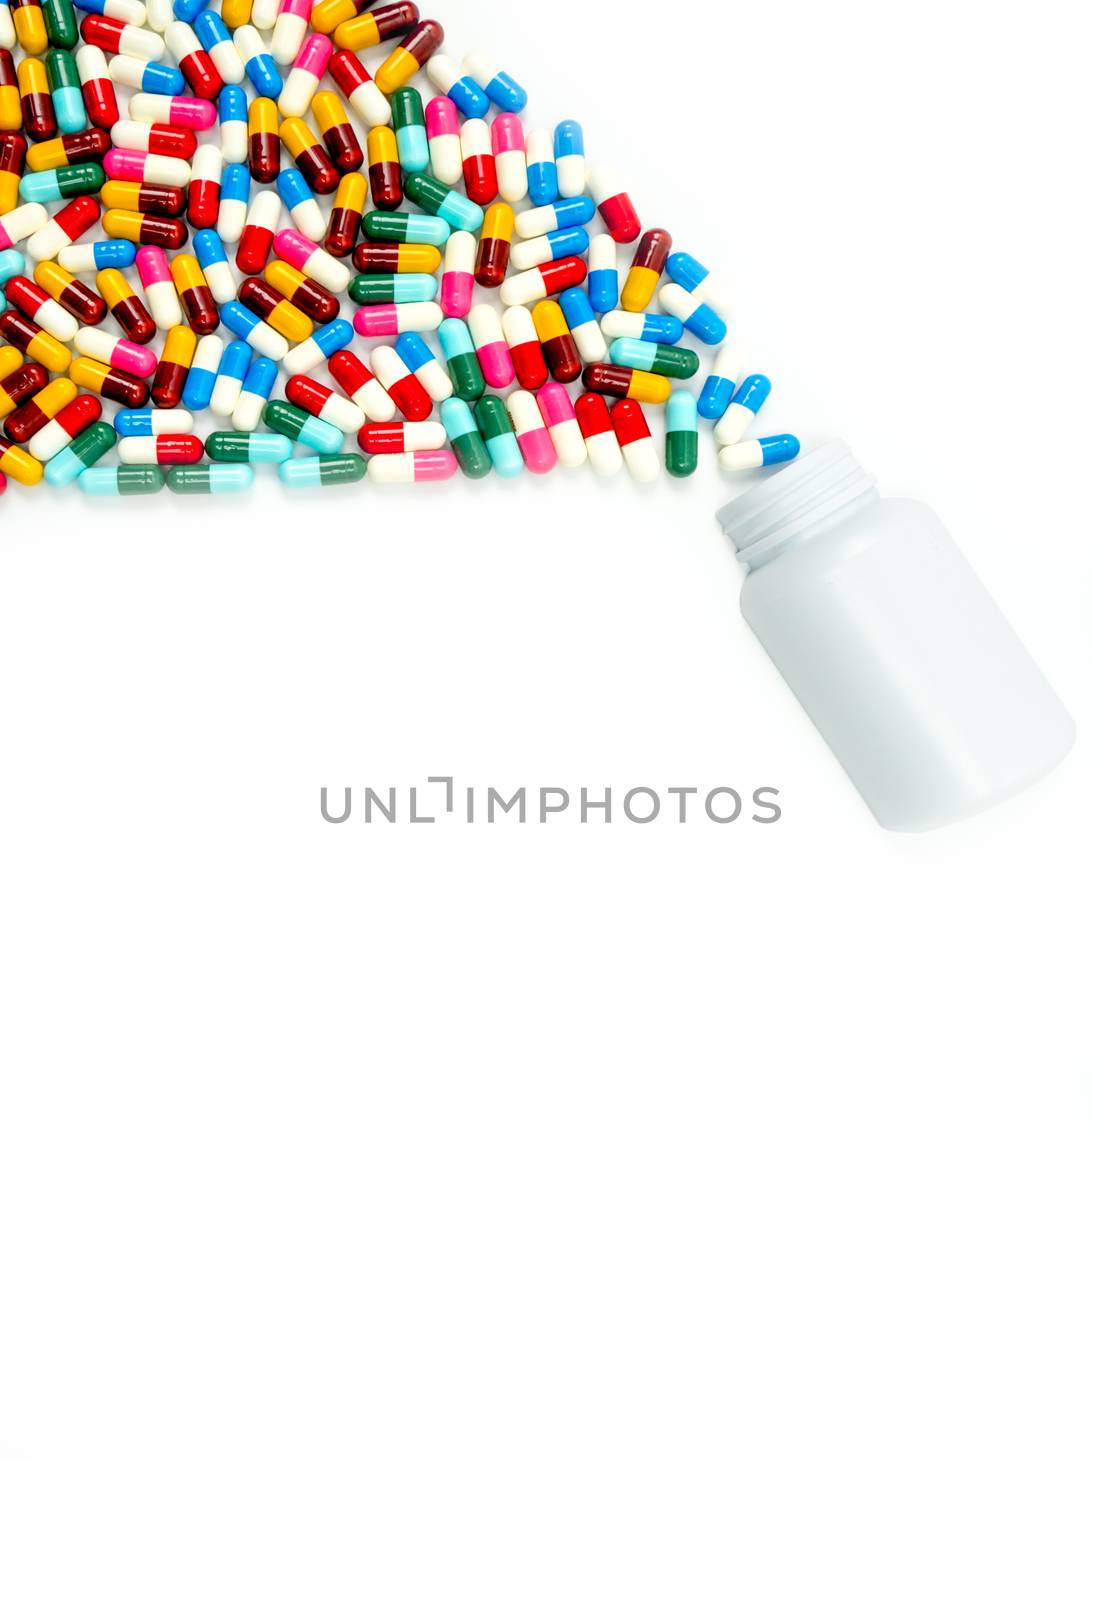 Antibiotic capsules spilling out of pill bottle on white background with copy space, just add your own text. Drug resistance concept. Antibiotics drug use with reasonable and global healthcare concept. Pharmaceutical industry. Pharmacy background. by Fahroni